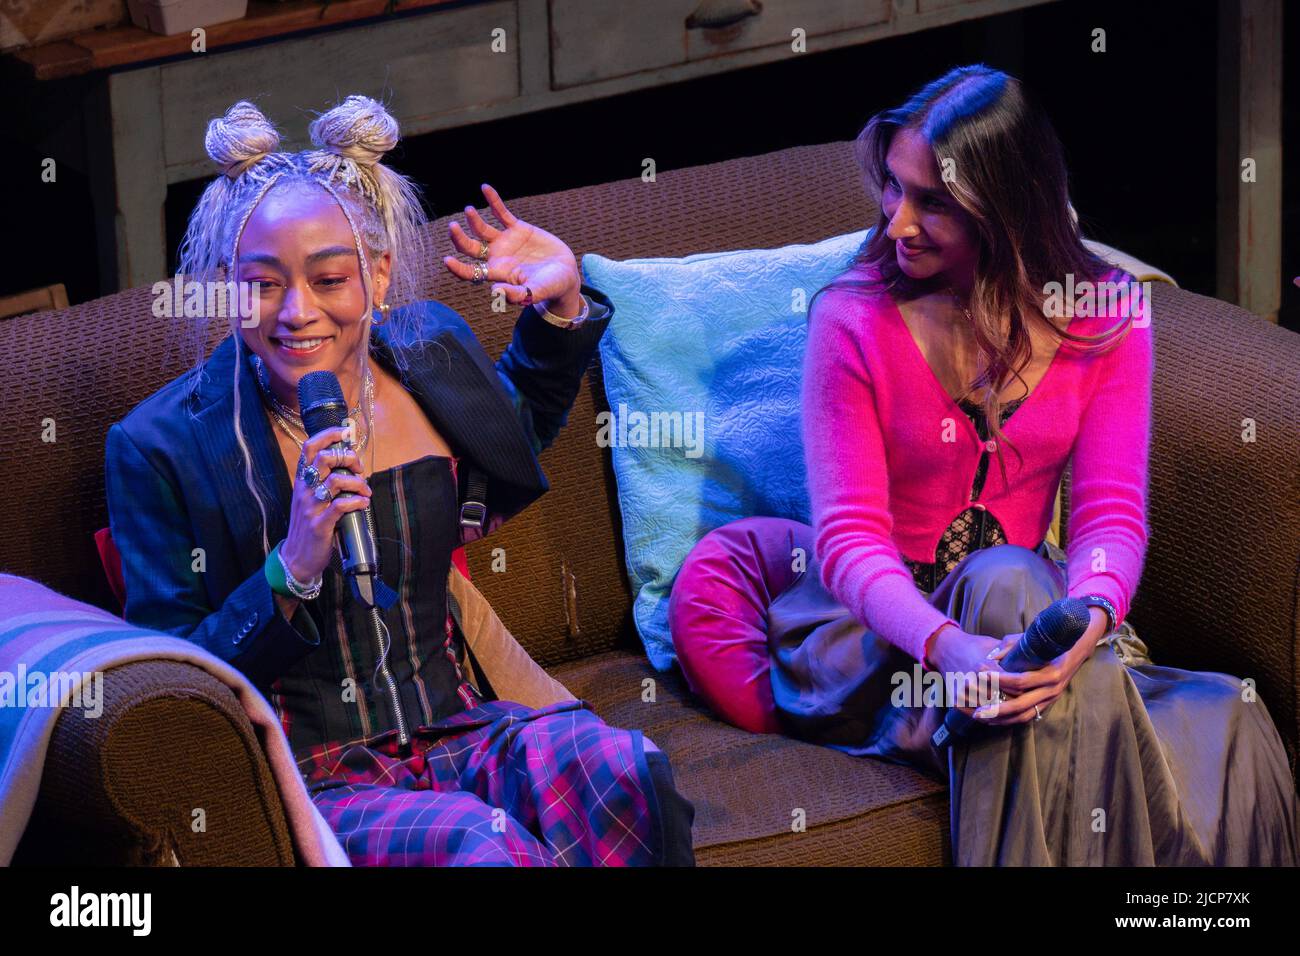 Tati Gabrielle, Actor & Philanthropist and Eshita Kabra- Davis attend the event. On the 10th June Overheated Live, kicked off with a panel event that took place in indigo at The O2 featuring introductions by Billie Eilish, FINNEAS, Maggie Baird and Ellie Goulding. Overheated, is a multi-day climate-focused event taking place at The O2 during Billie Eilish's Happier Than Ever, World Tour in collaboration with Support   Feed and REVERB that is bringing together activists, musicians and designers to discuss climate change and how to make a difference. Stock Photo